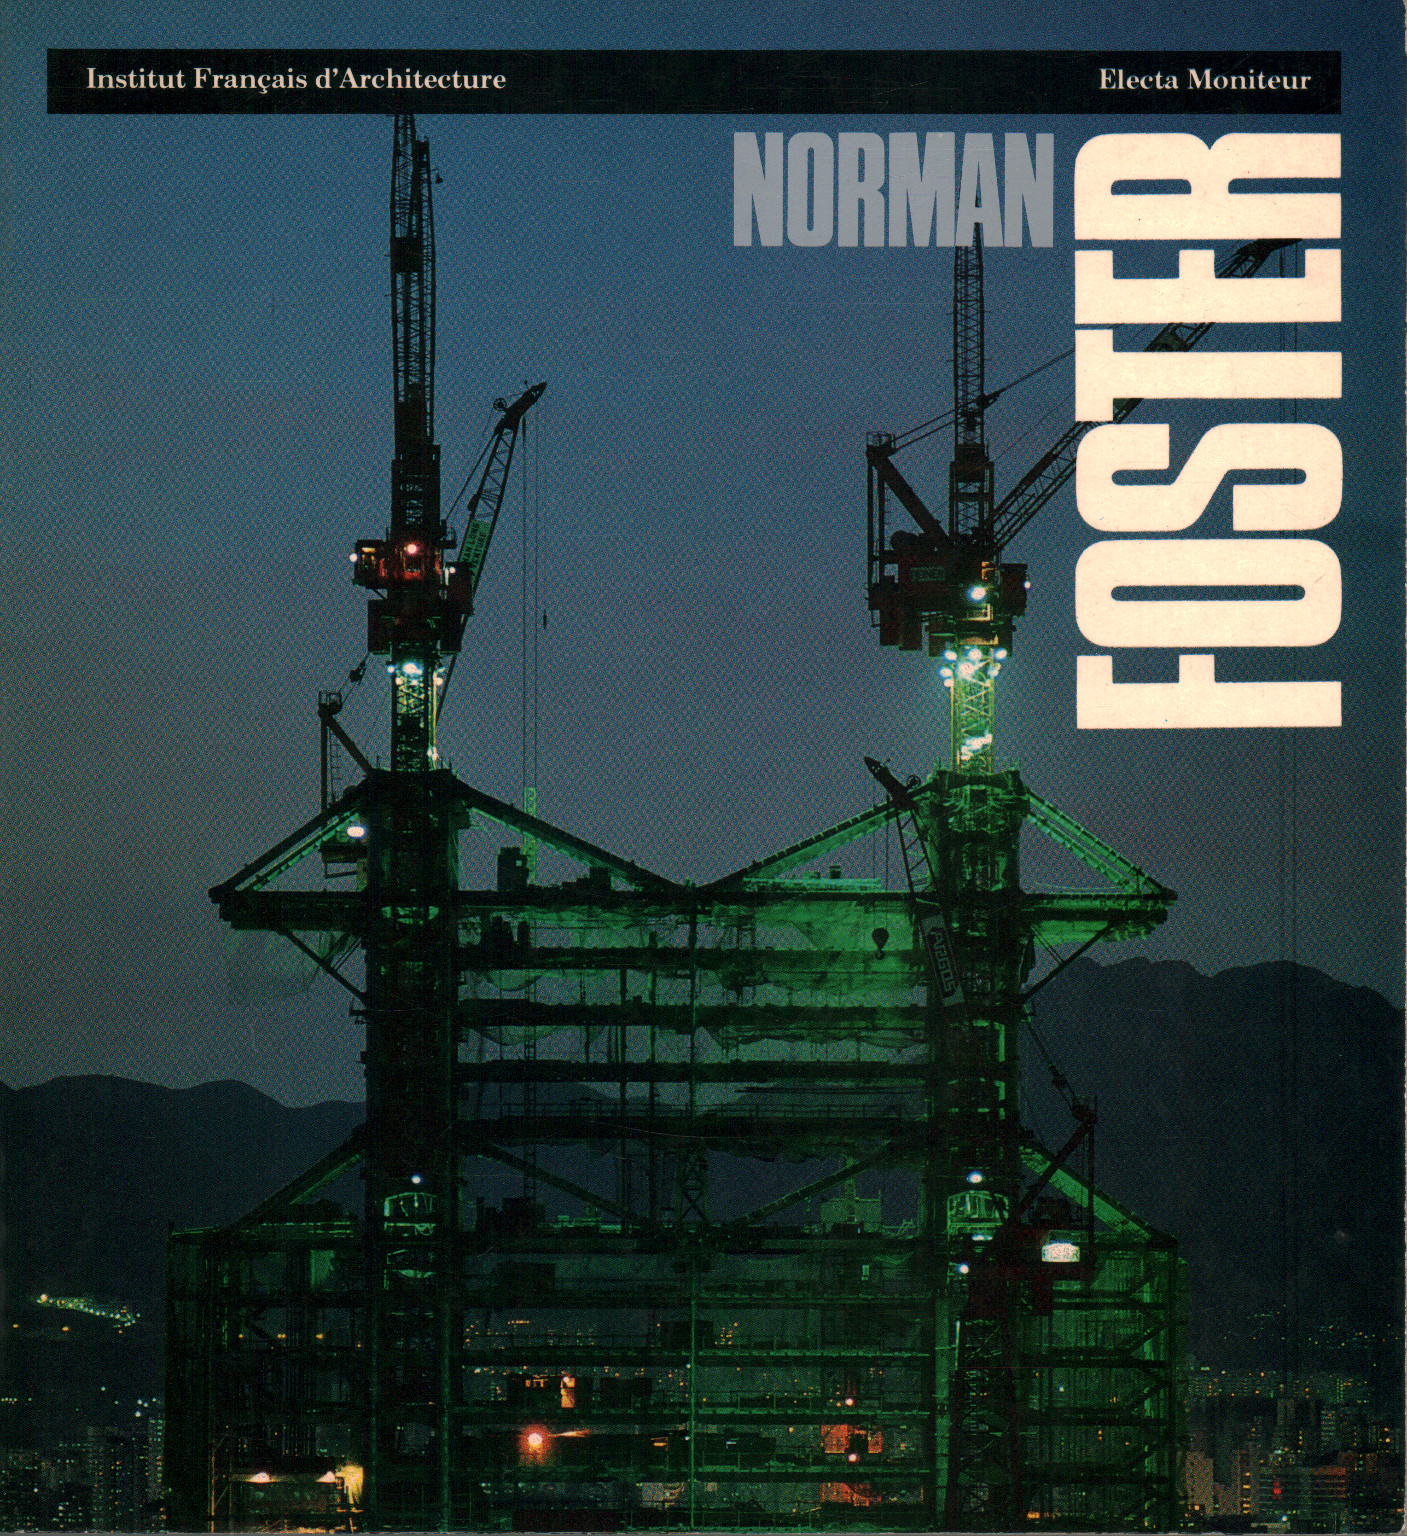 Norman Foster, s.a.